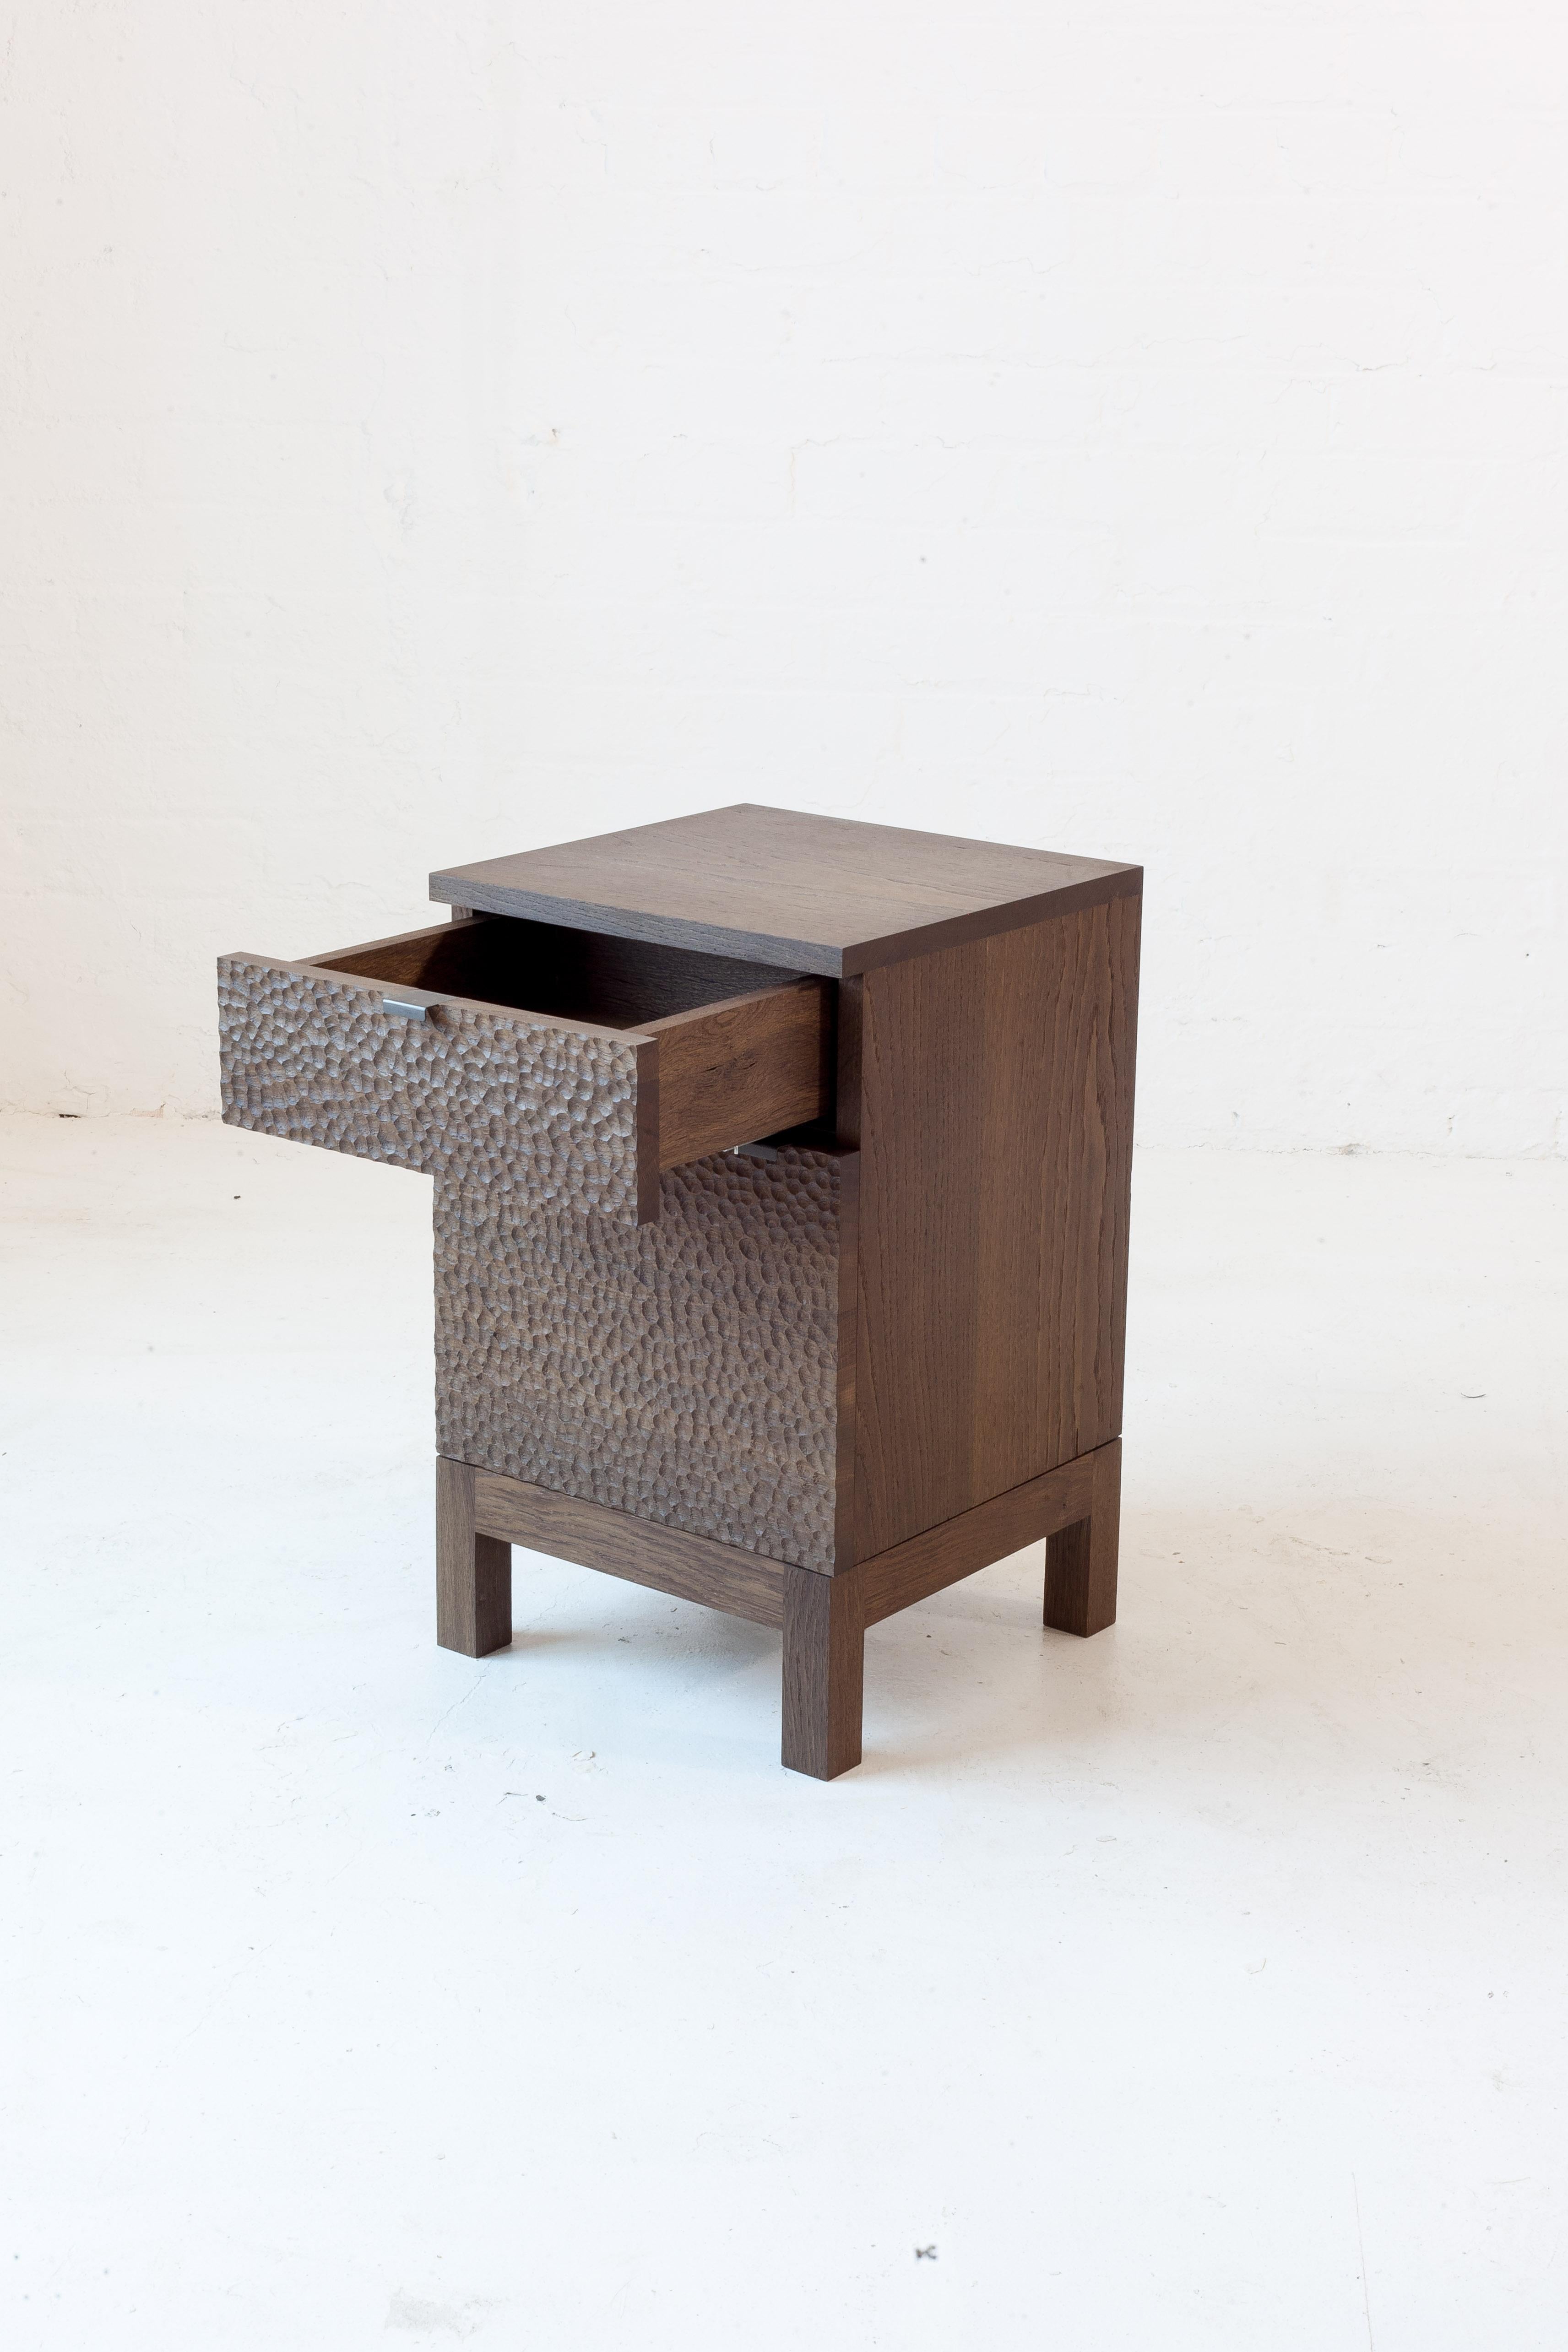 A bedside table with hand-carved textured doors. 

This piece is made in solid English oak. The oak is darkened using the traditional process of fuming, where the timber is exposed to ammonia to react with naturally occurring tannins. This results